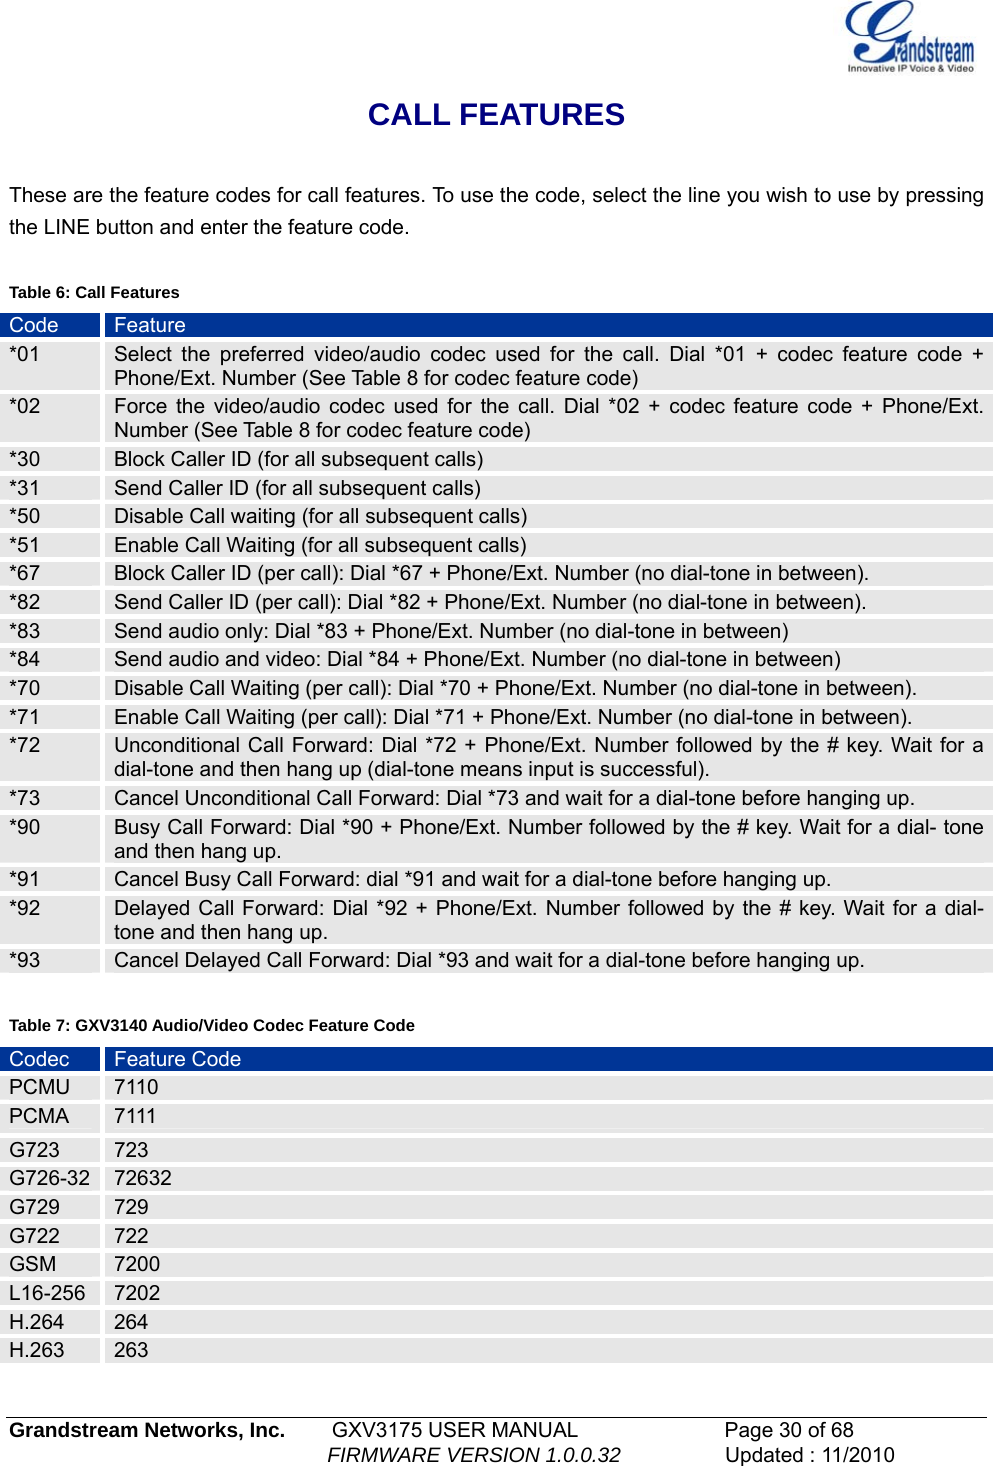   Grandstream Networks, Inc.        GXV3175 USER MANUAL                      Page 30 of 68                                                        FIRMWARE VERSION 1.0.0.32                  Updated : 11/2010  CALL FEATURES  These are the feature codes for call features. To use the code, select the line you wish to use by pressing the LINE button and enter the feature code.  Table 6: Call Features Code  Feature *01  Select the preferred video/audio codec used for the call. Dial *01 + codec feature code + Phone/Ext. Number (See Table 8 for codec feature code)  *02  Force the video/audio codec used for the call. Dial *02 + codec feature code + Phone/Ext. Number (See Table 8 for codec feature code) *30  Block Caller ID (for all subsequent calls) *31  Send Caller ID (for all subsequent calls) *50  Disable Call waiting (for all subsequent calls) *51  Enable Call Waiting (for all subsequent calls) *67  Block Caller ID (per call): Dial *67 + Phone/Ext. Number (no dial-tone in between). *82  Send Caller ID (per call): Dial *82 + Phone/Ext. Number (no dial-tone in between). *83  Send audio only: Dial *83 + Phone/Ext. Number (no dial-tone in between) *84  Send audio and video: Dial *84 + Phone/Ext. Number (no dial-tone in between)  *70  Disable Call Waiting (per call): Dial *70 + Phone/Ext. Number (no dial-tone in between). *71  Enable Call Waiting (per call): Dial *71 + Phone/Ext. Number (no dial-tone in between). *72  Unconditional Call Forward: Dial *72 + Phone/Ext. Number followed by the # key. Wait for a dial-tone and then hang up (dial-tone means input is successful). *73  Cancel Unconditional Call Forward: Dial *73 and wait for a dial-tone before hanging up. *90  Busy Call Forward: Dial *90 + Phone/Ext. Number followed by the # key. Wait for a dial- tone and then hang up. *91  Cancel Busy Call Forward: dial *91 and wait for a dial-tone before hanging up. *92  Delayed Call Forward: Dial *92 + Phone/Ext. Number followed by the # key. Wait for a dial-tone and then hang up. *93  Cancel Delayed Call Forward: Dial *93 and wait for a dial-tone before hanging up.  Table 7: GXV3140 Audio/Video Codec Feature Code Codec  Feature Code  PCMU  7110 PCMA  7111  G723  723 G726-32  72632 G729  729 G722  722 GSM  7200 L16-256  7202 H.264  264 H.263  263 